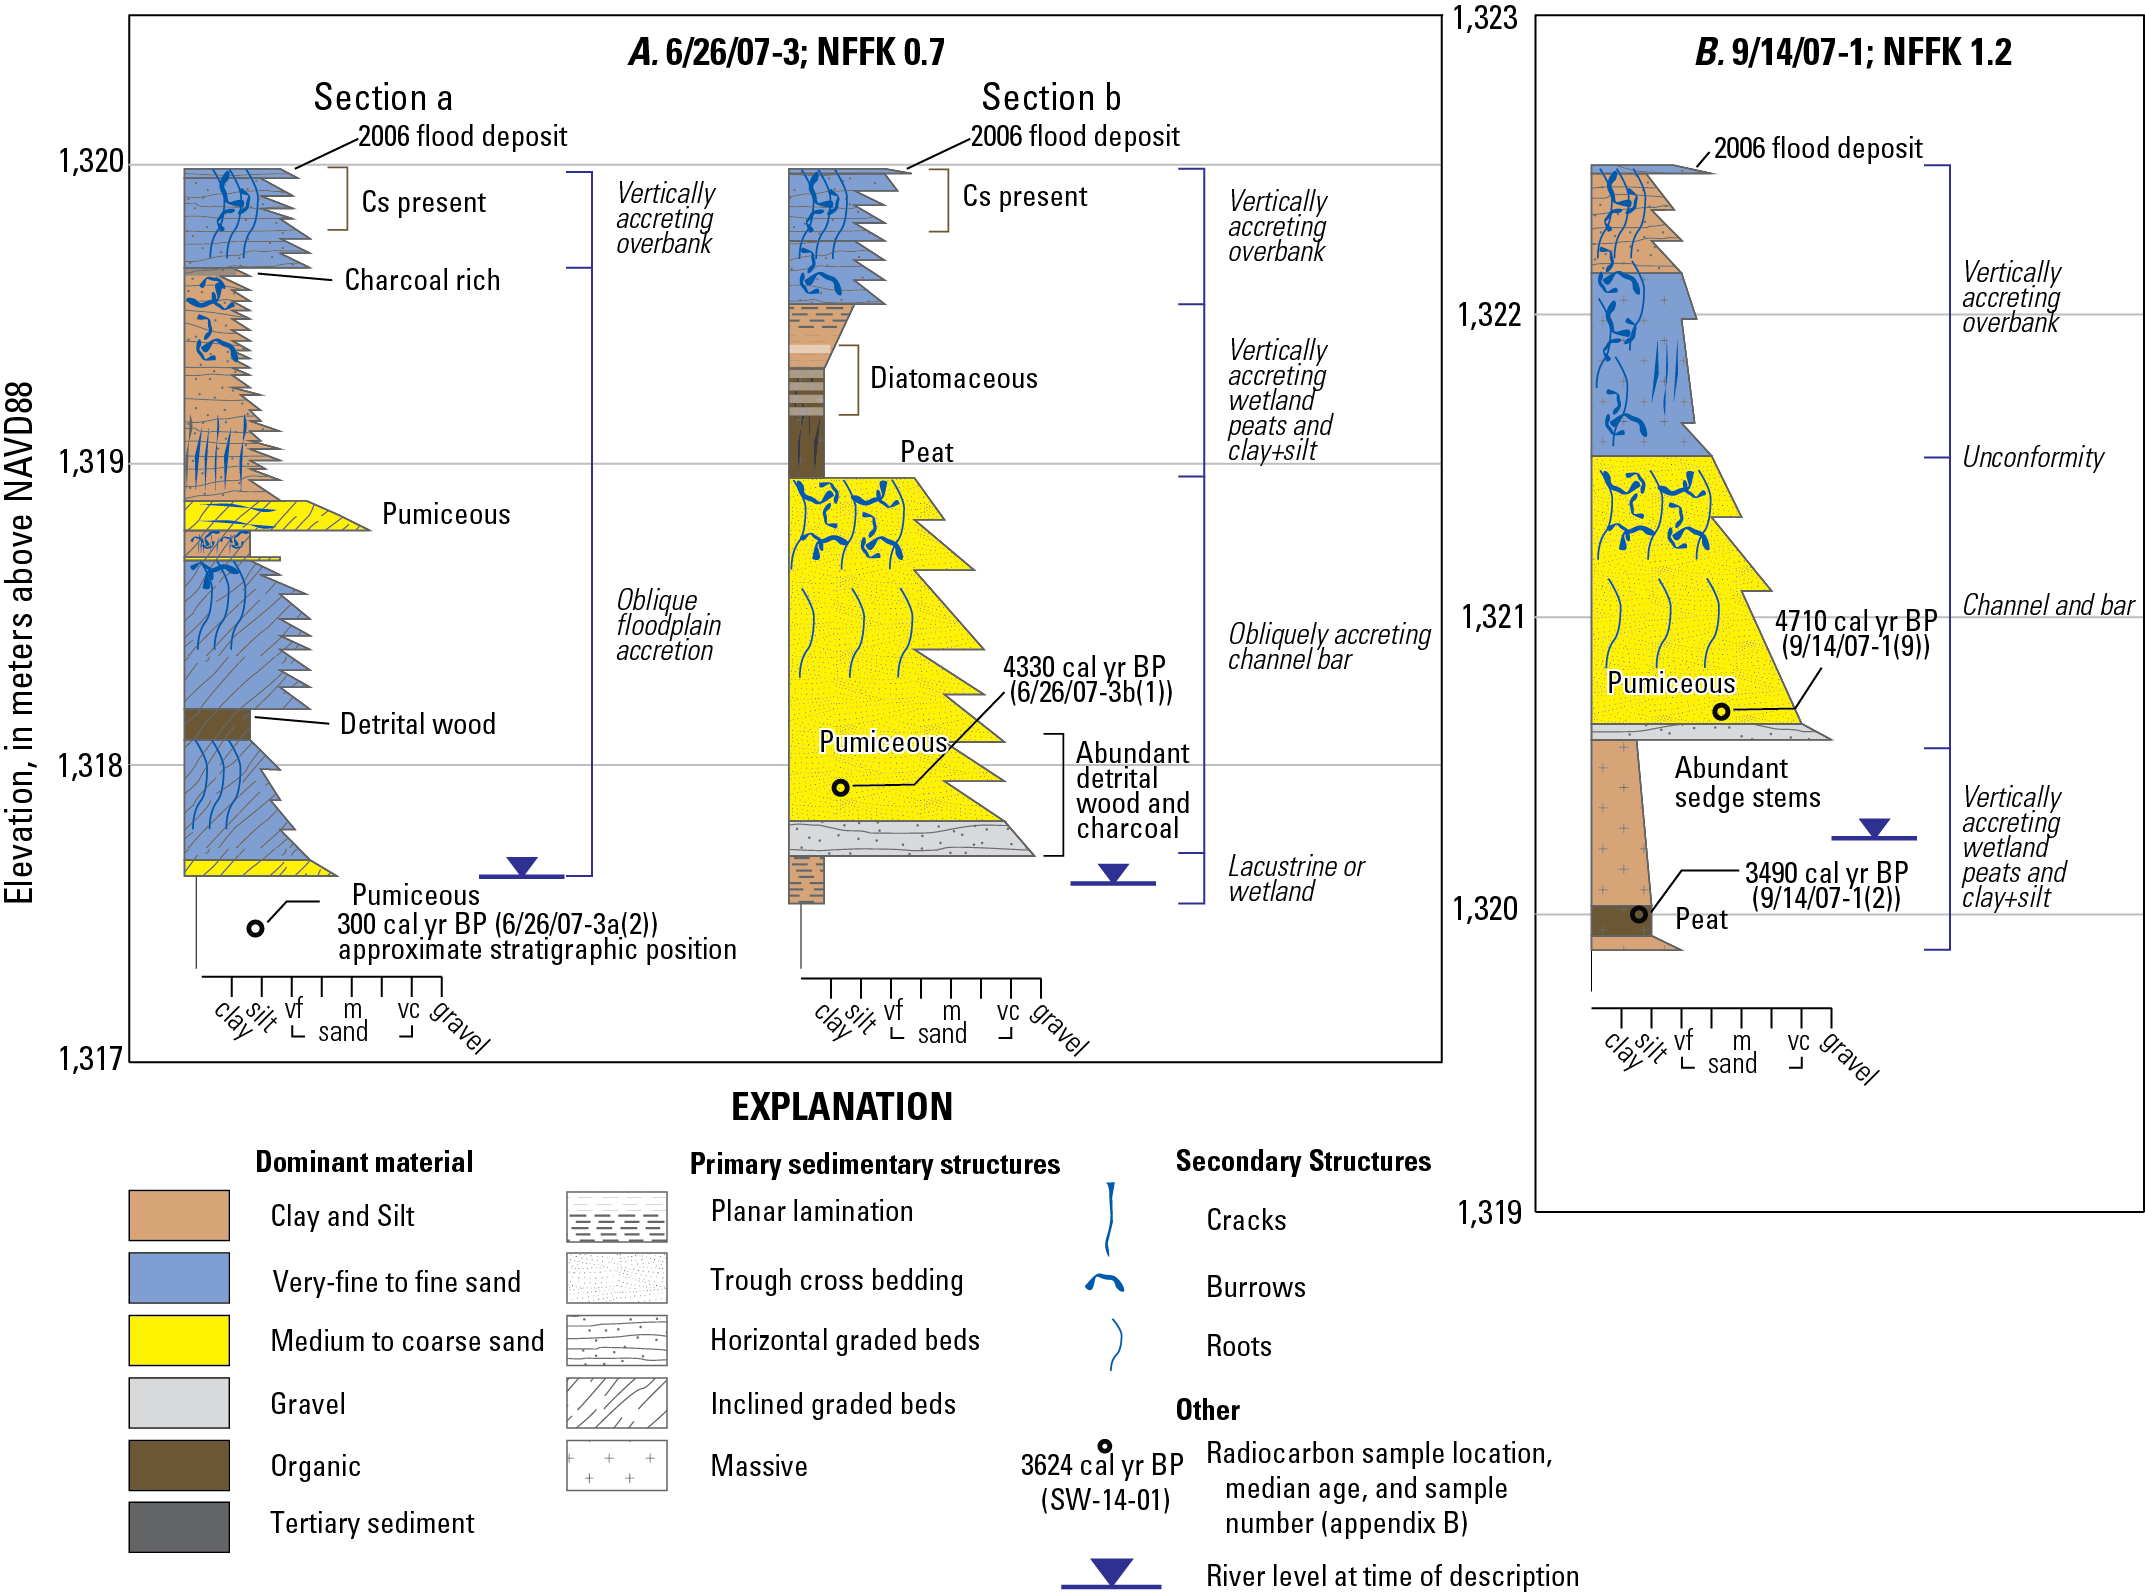 Stratigraphic sections